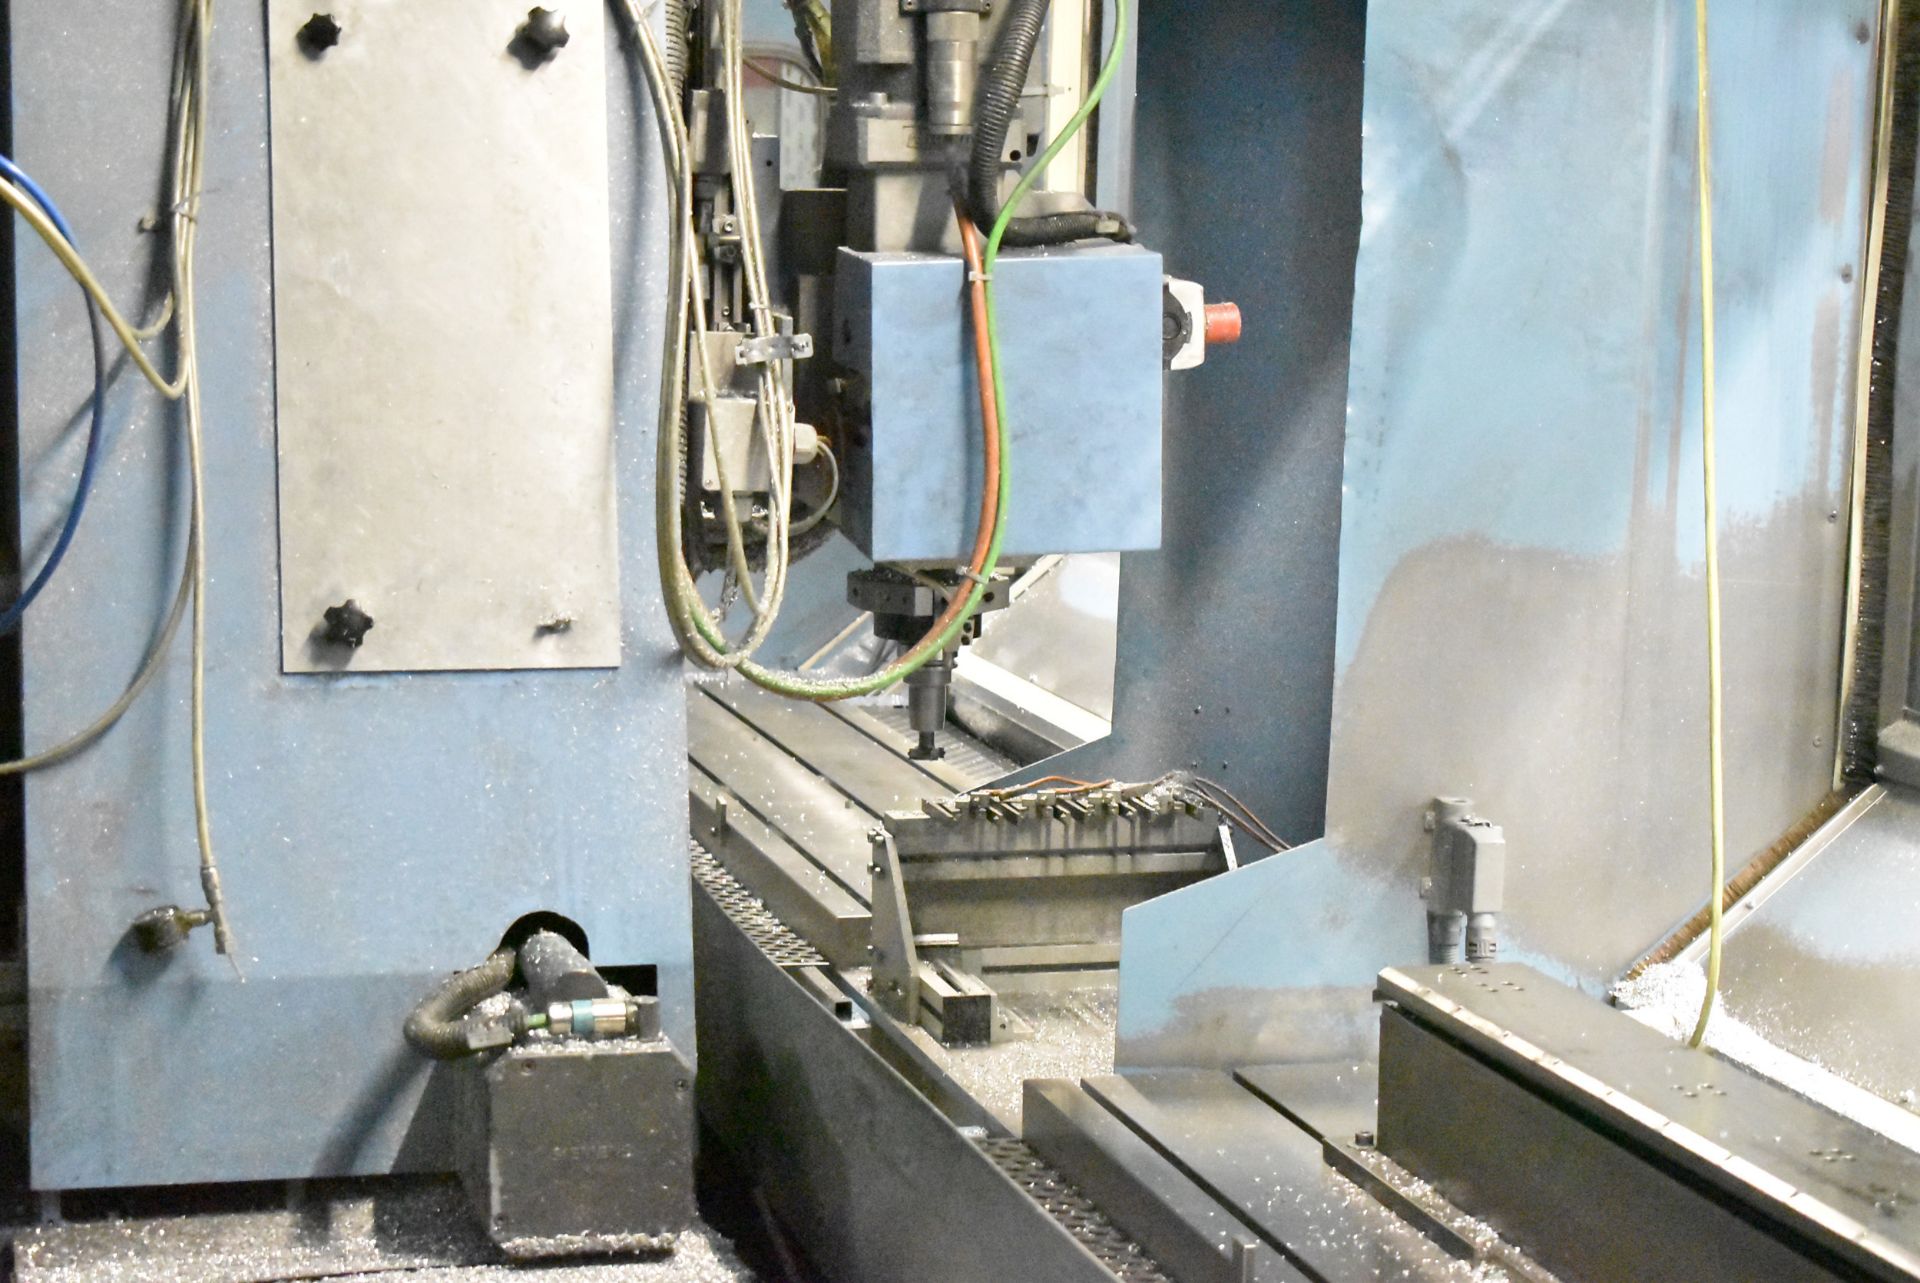 MAKA 7 AXIS CNC MACHINING CENTER WITH SIEMENS SINEUMERIK TOUCH SCREEN CNC CONTROL, FULL SOUNDPROOF - Image 5 of 9